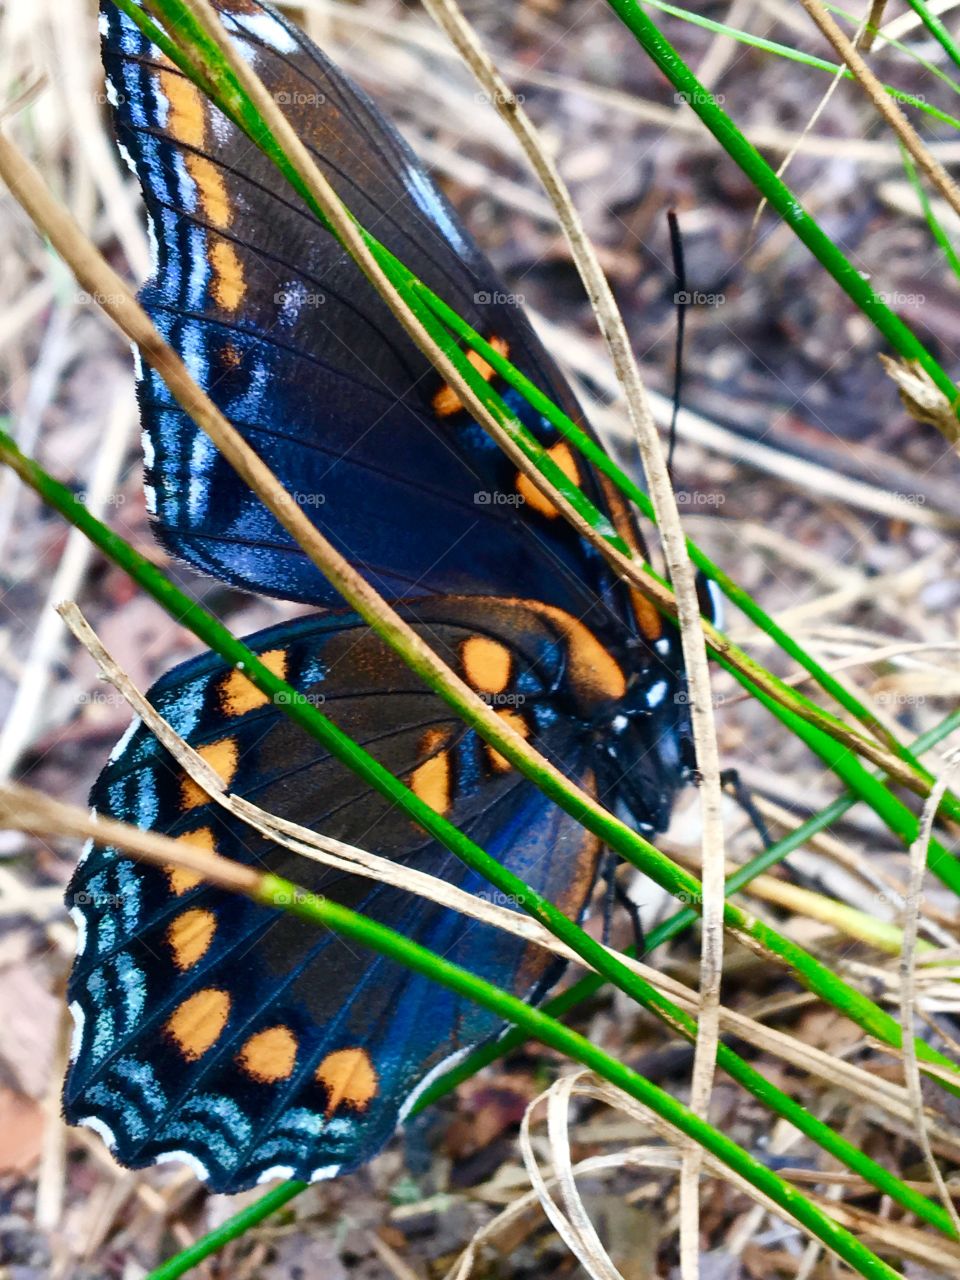 Up close and personal with a beautiful, one winged butterfly 